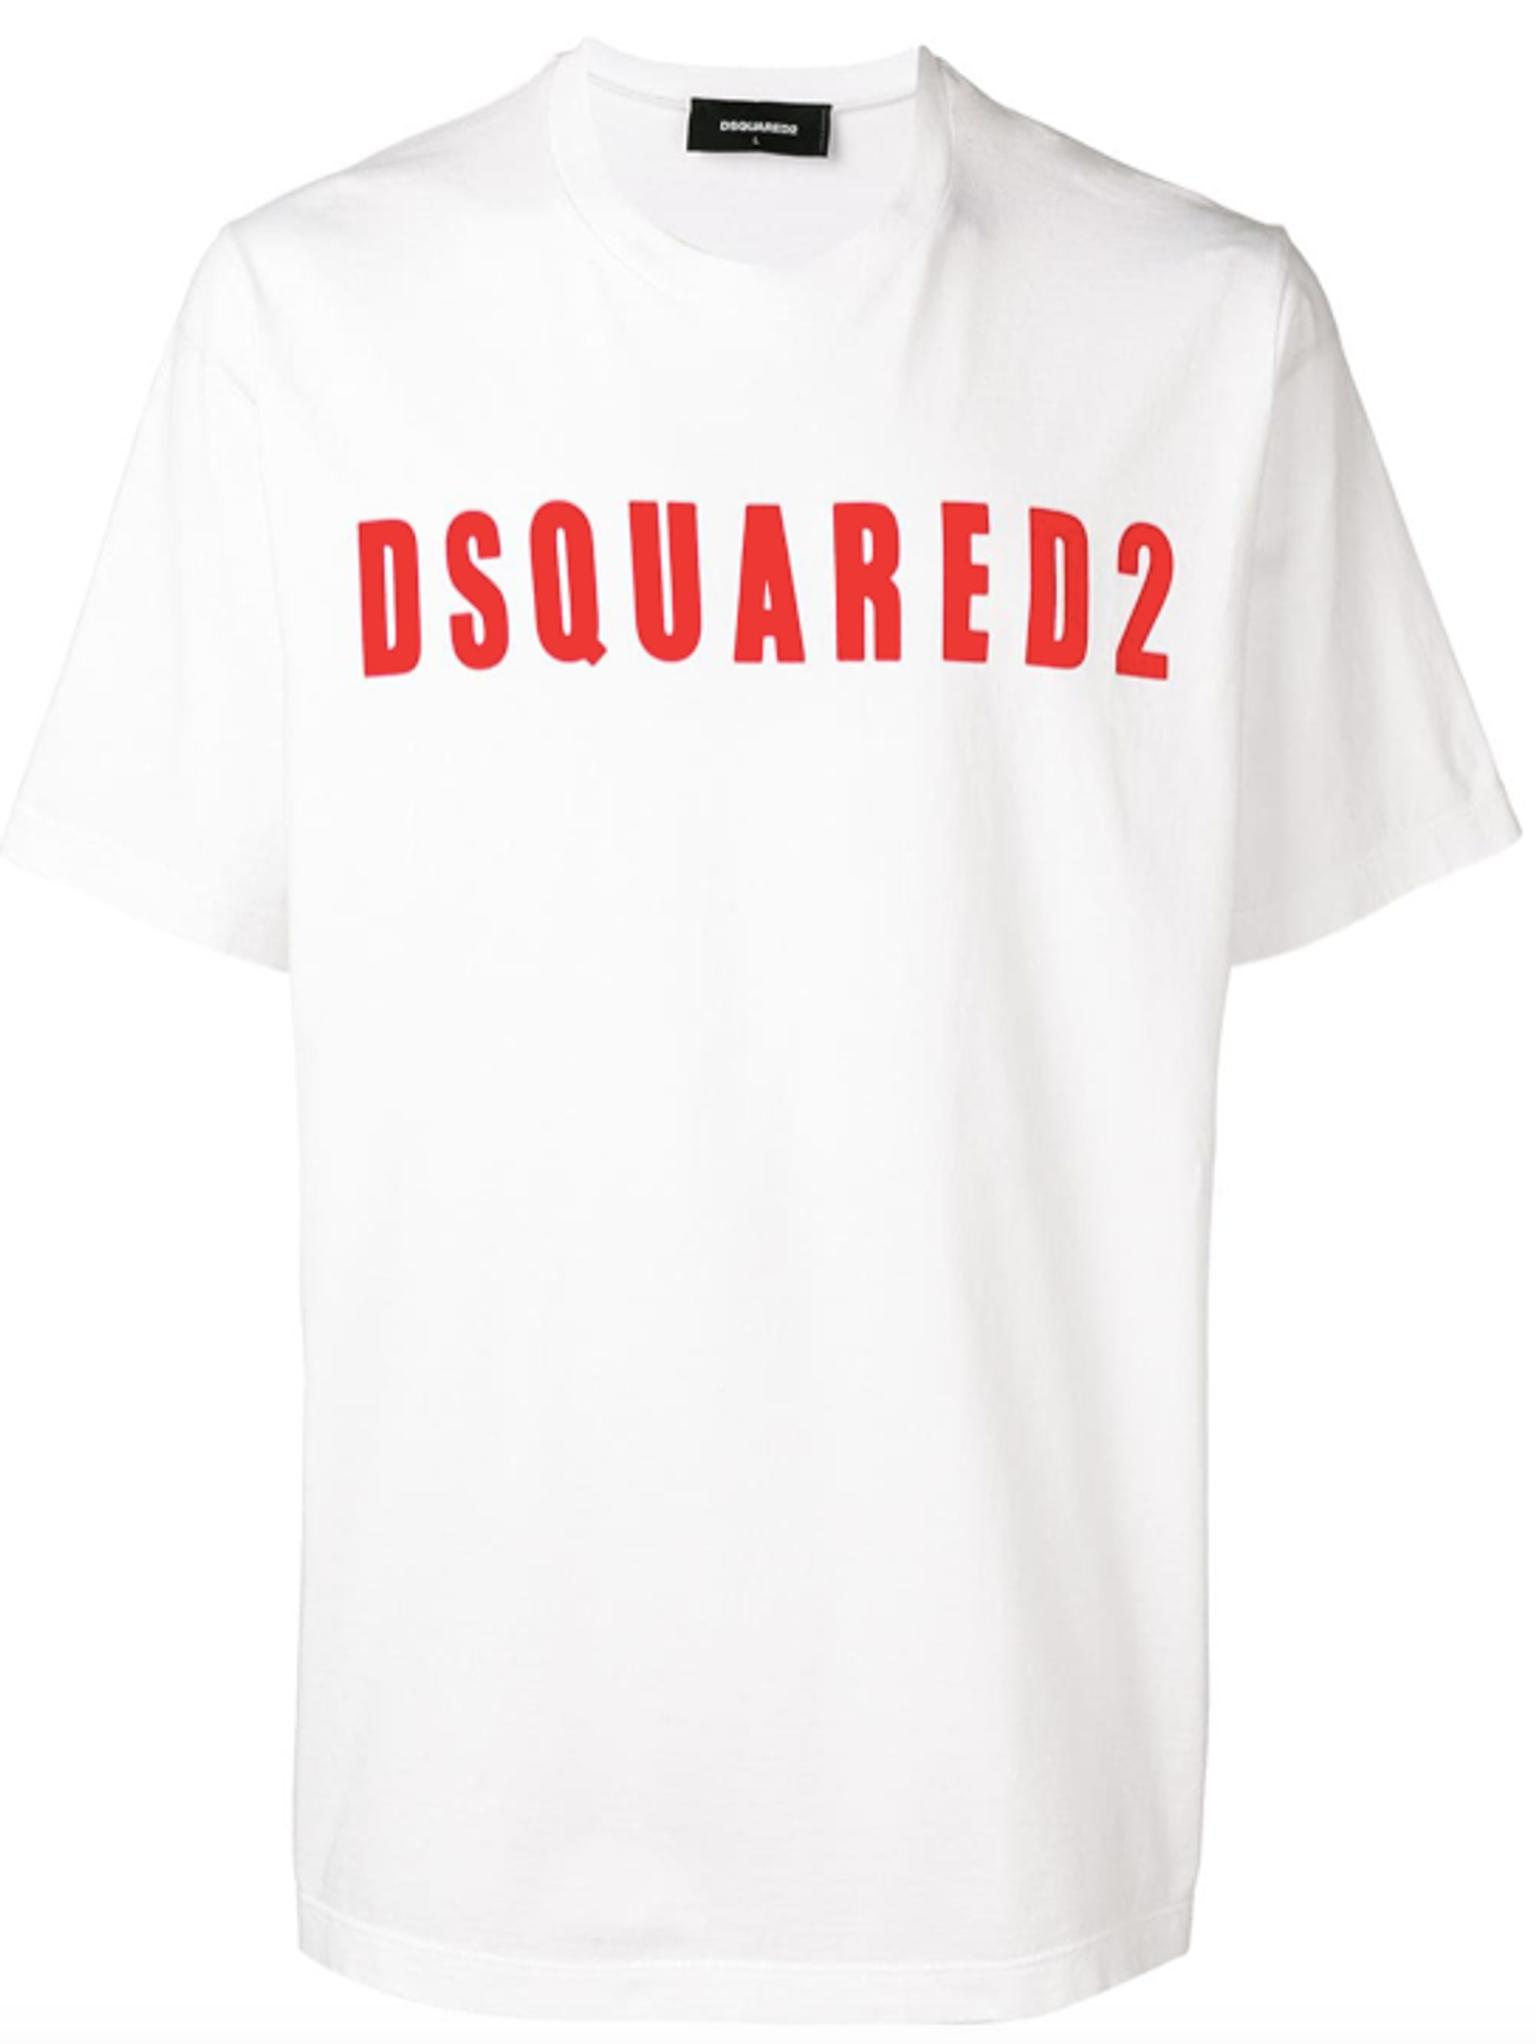 dsquared2 T shirt in for £30.00 for 